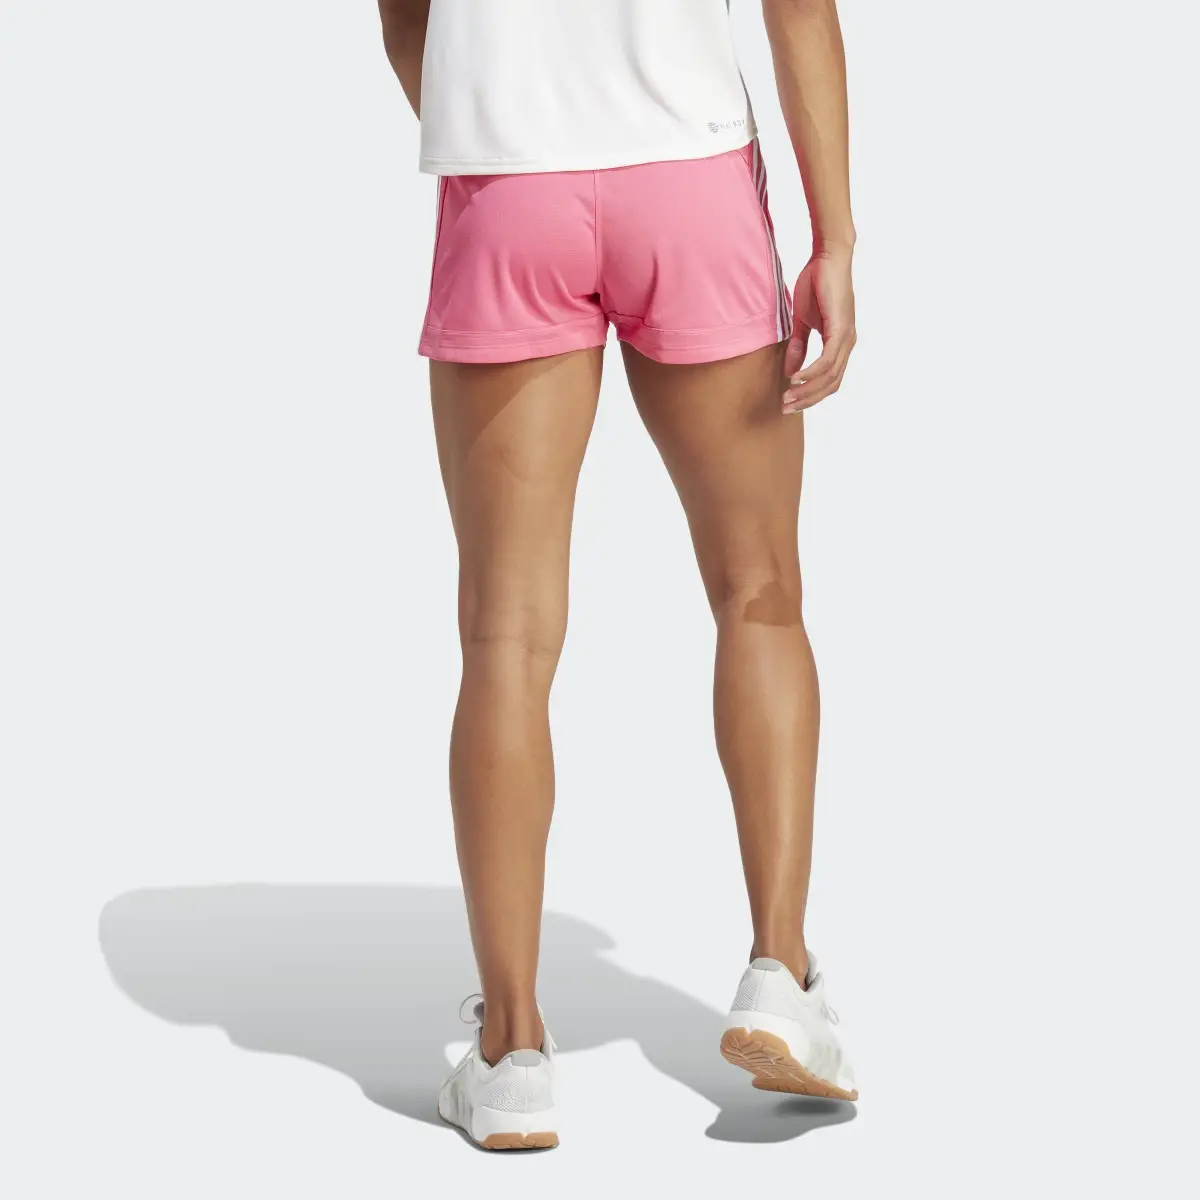 Adidas Pacer 3-Stripes Knit Shorts. 2